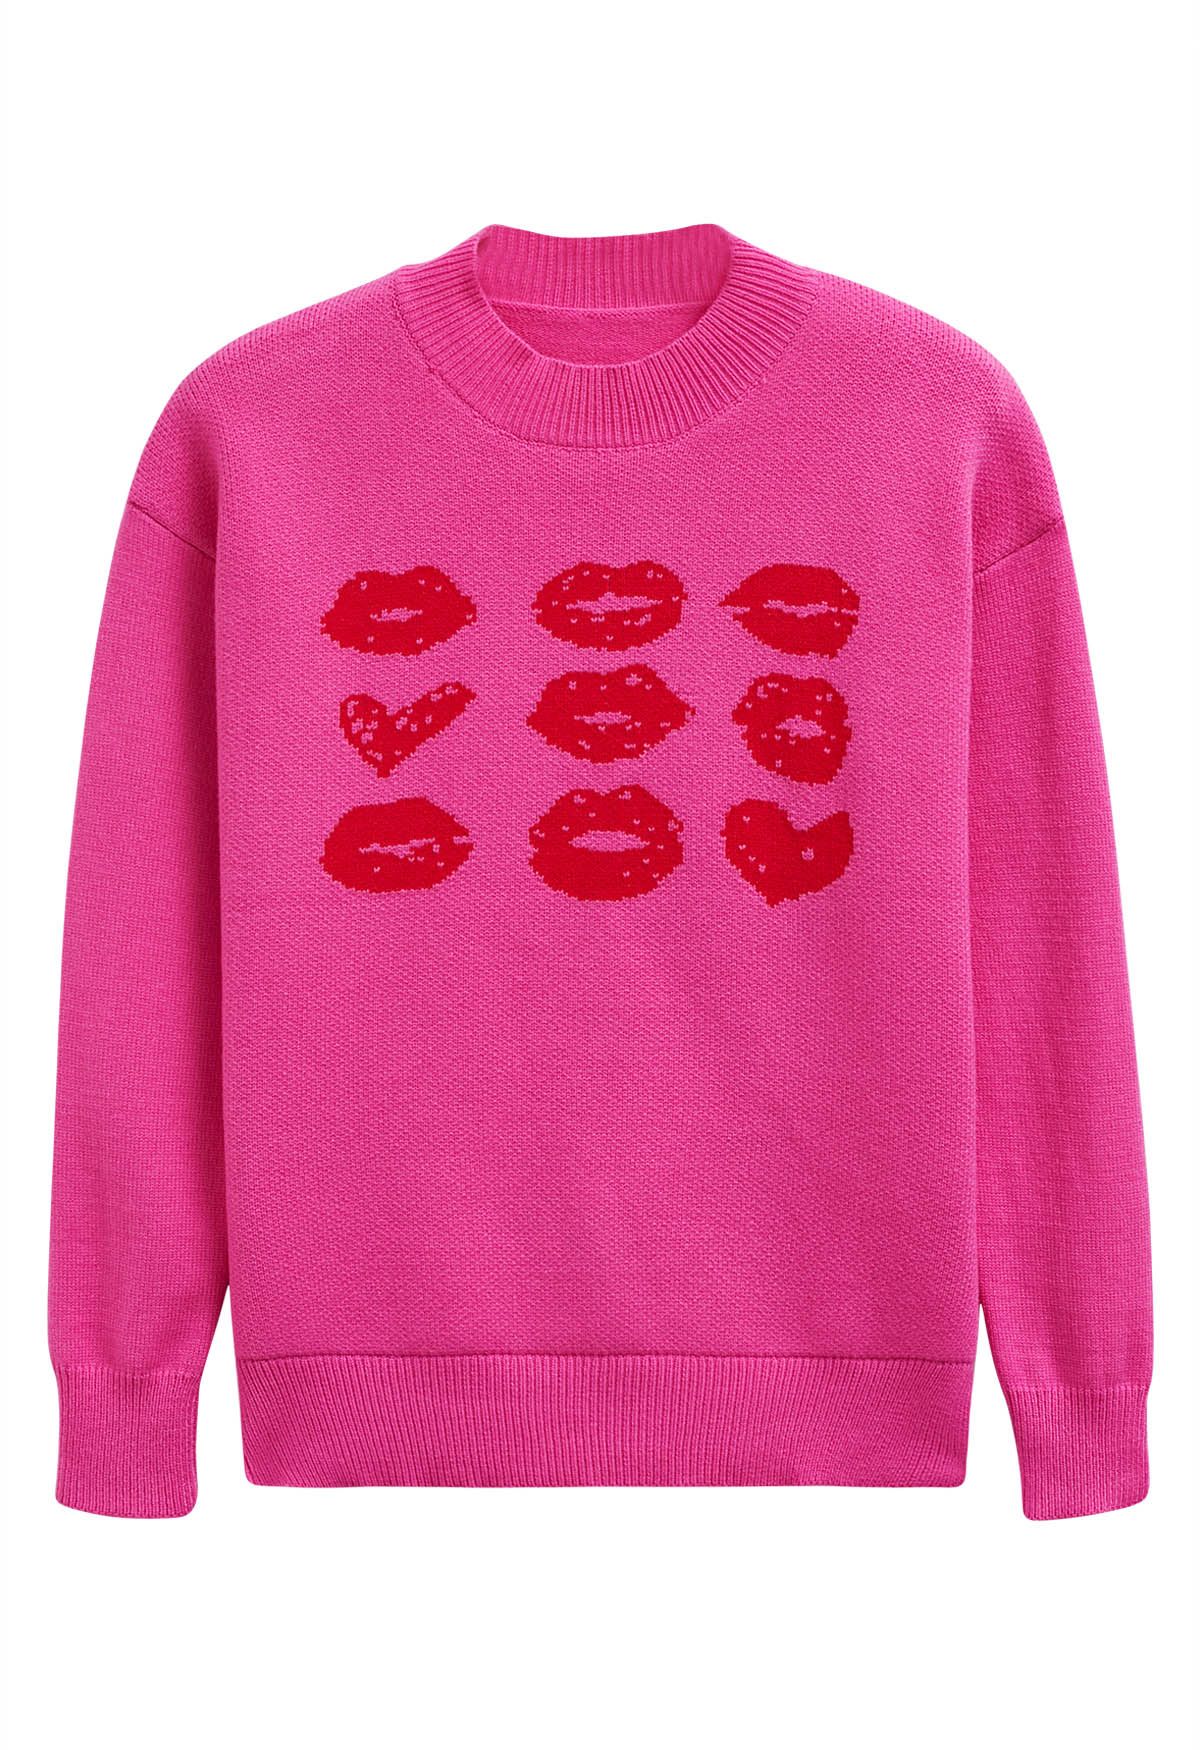 Red Lips Pattern Knit Sweater in Hot Pink